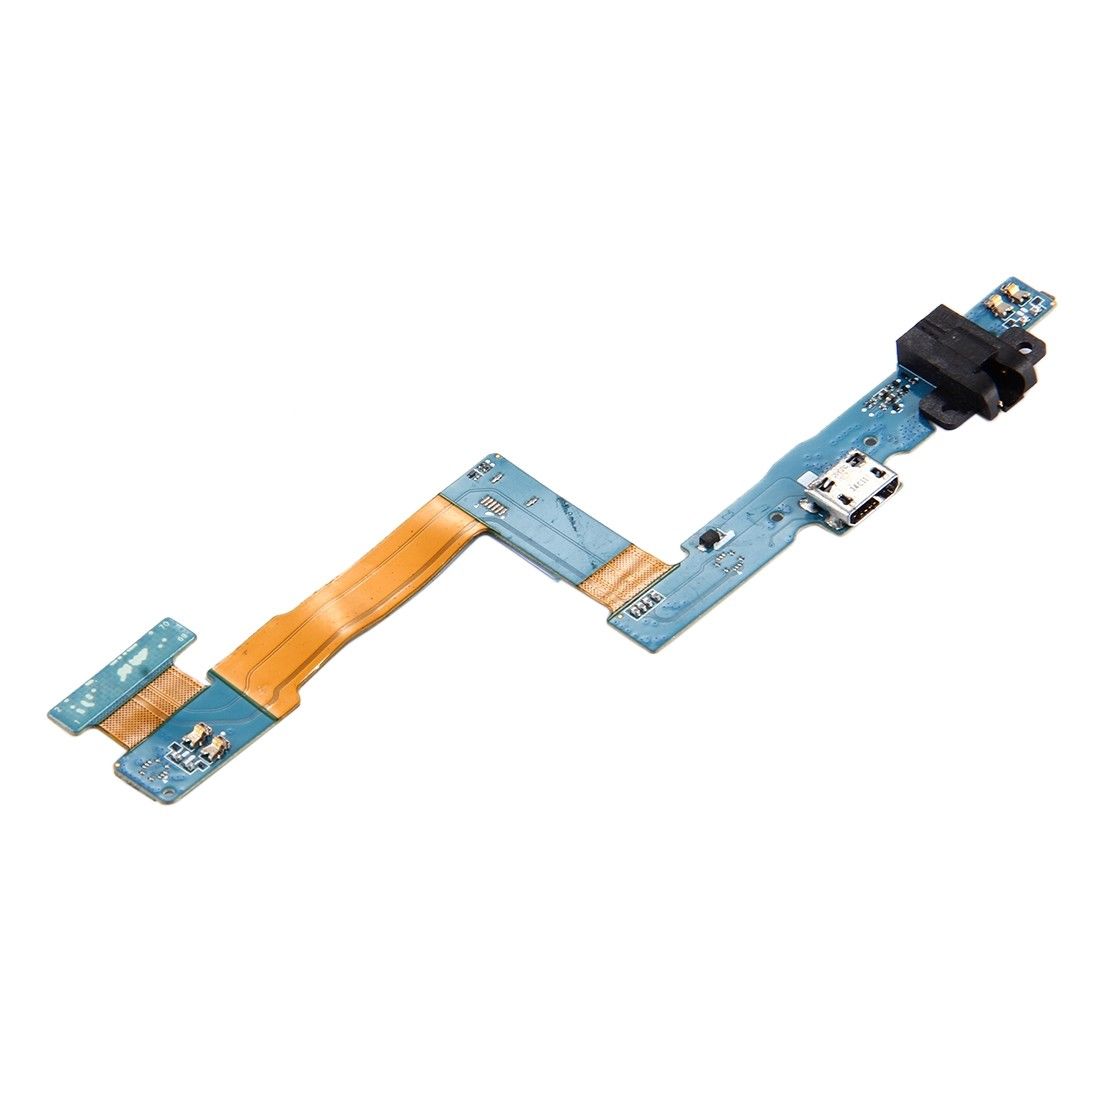 Samsung Galaxy Tab A 9.7 T550 USB Charging Port Connector Flex Cable for [product_price] - First Help Tech